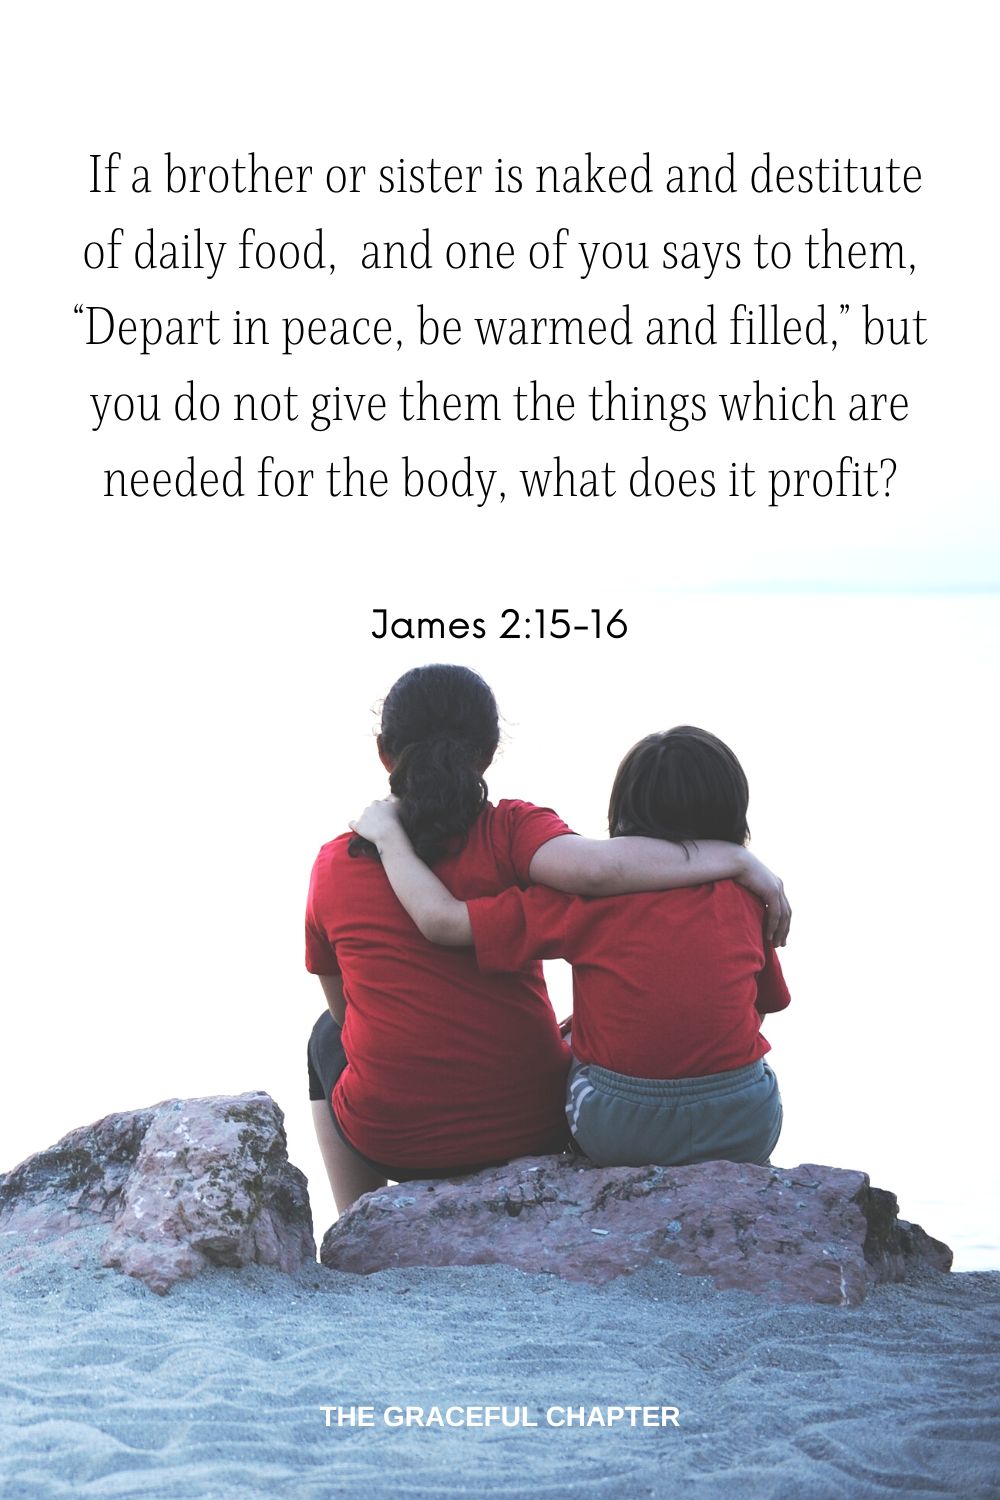  If a brother or sister is naked and destitute of daily food,  and one of you says to them, “Depart in peace, be warmed and filled,” but you do not give them the things which are needed for the body, what does it profit? James 2:15-16